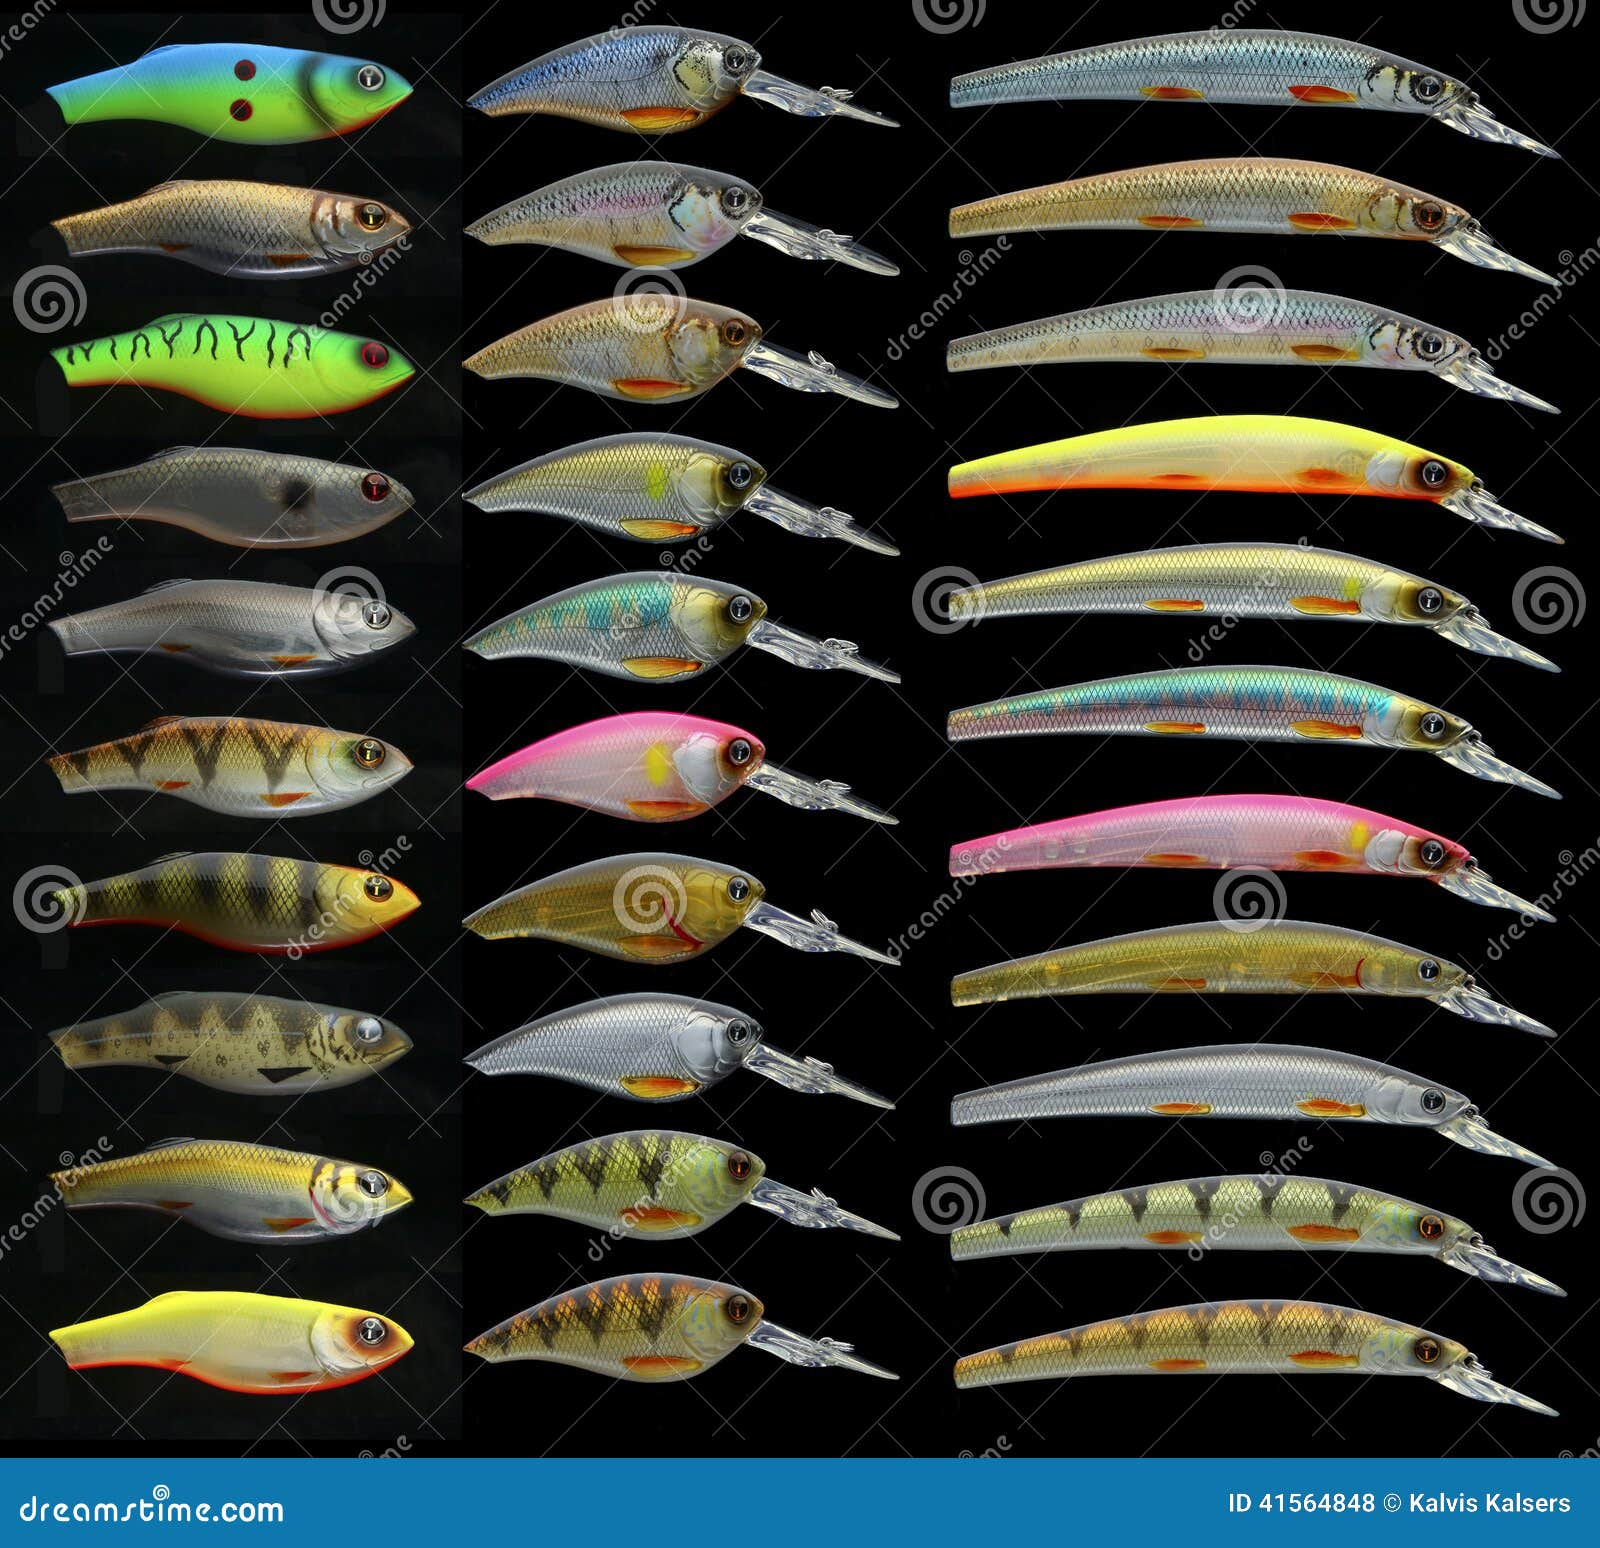 https://thumbs.dreamstime.com/z/fishing-lures-colorful-black-background-41564848.jpg